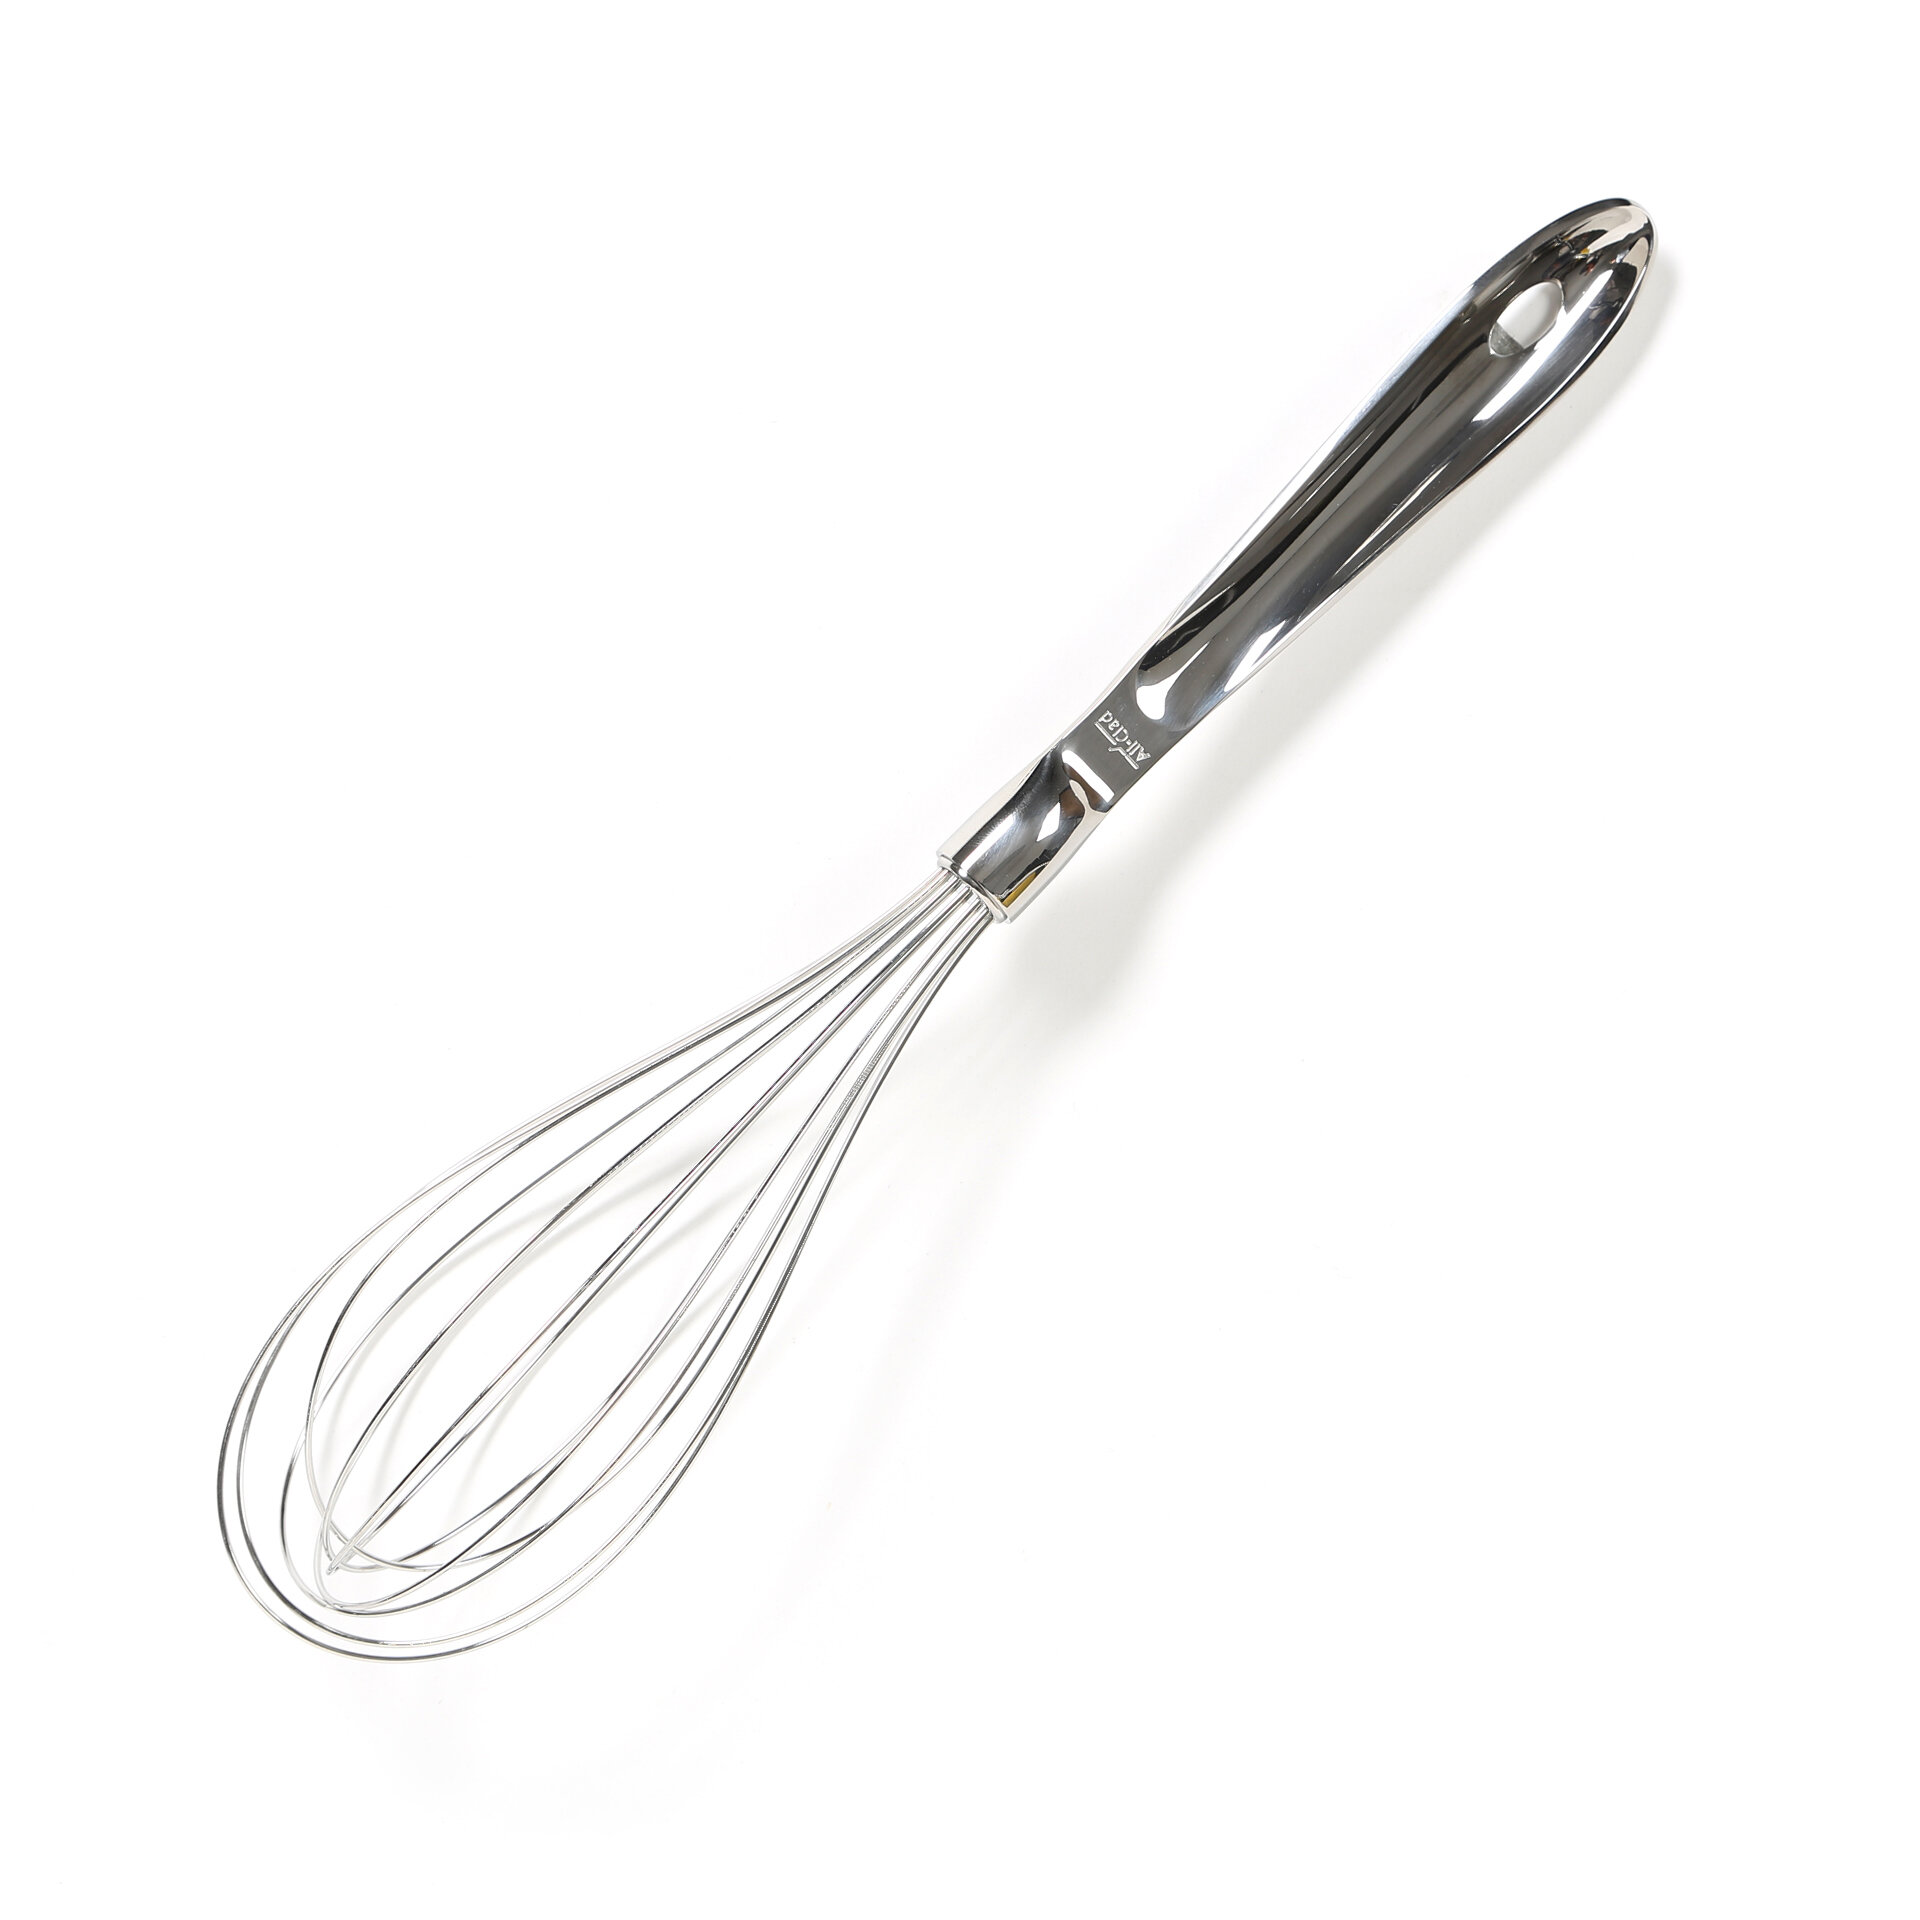 All-Clad Whisk, 12 - Cooks